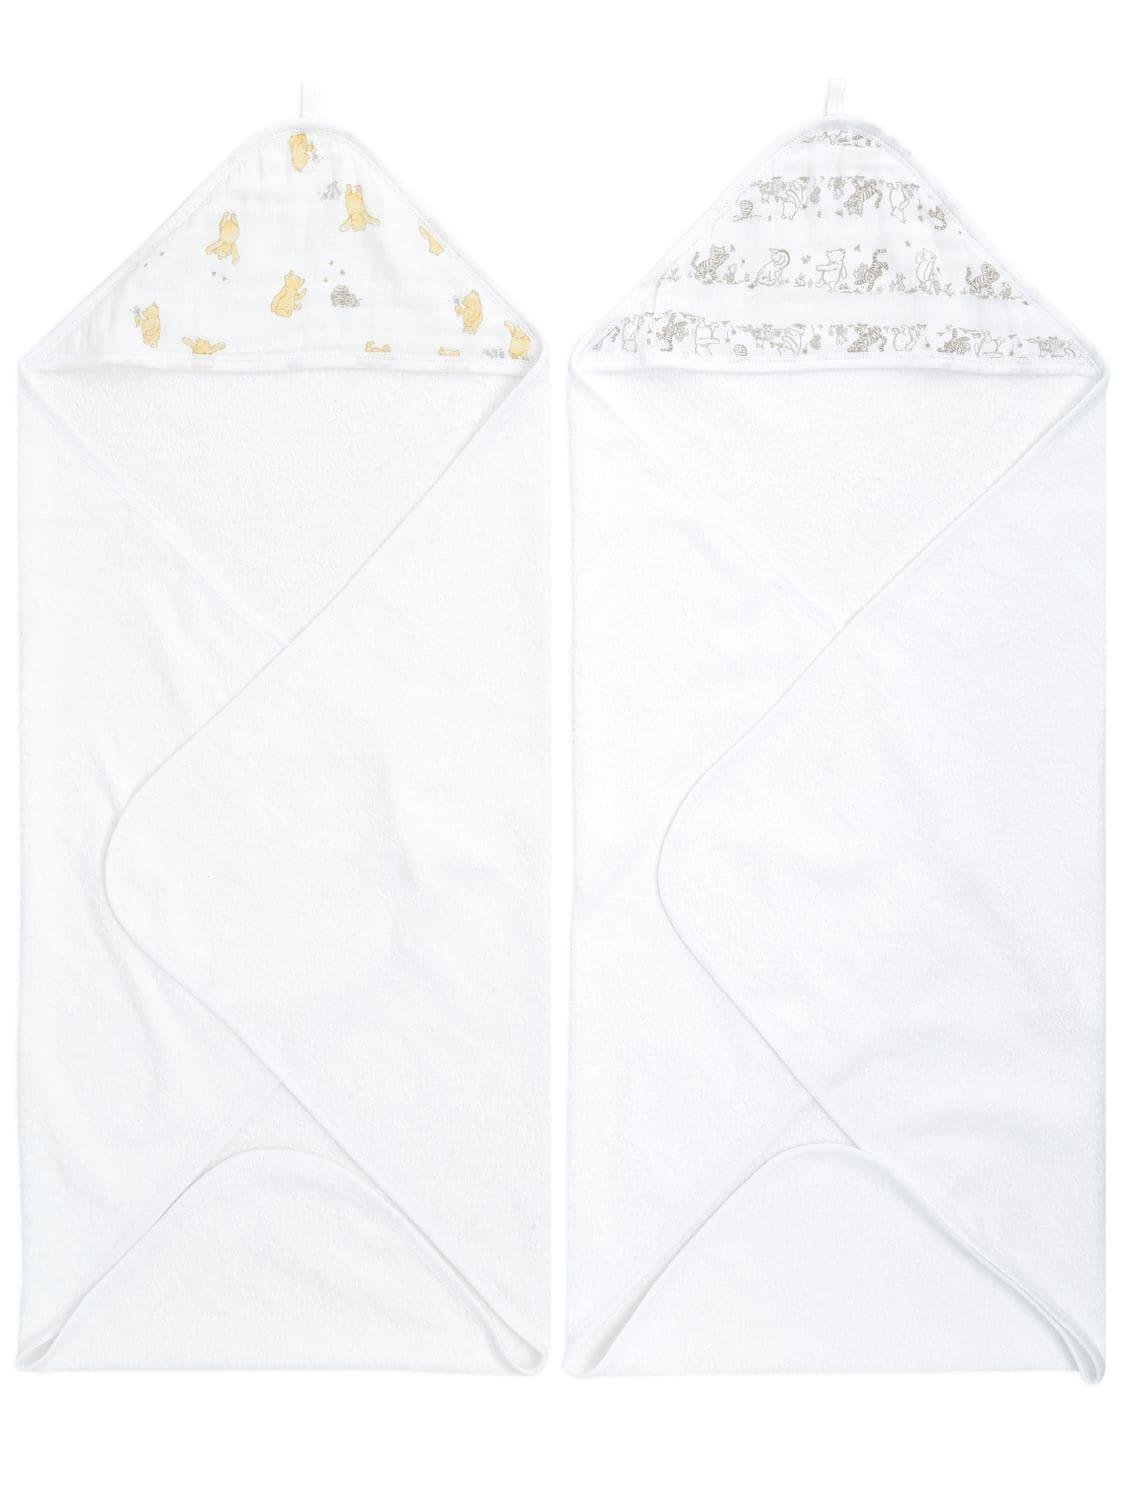 Winne & Friends Hooded Cotton Towels by ADEN + ANAIS